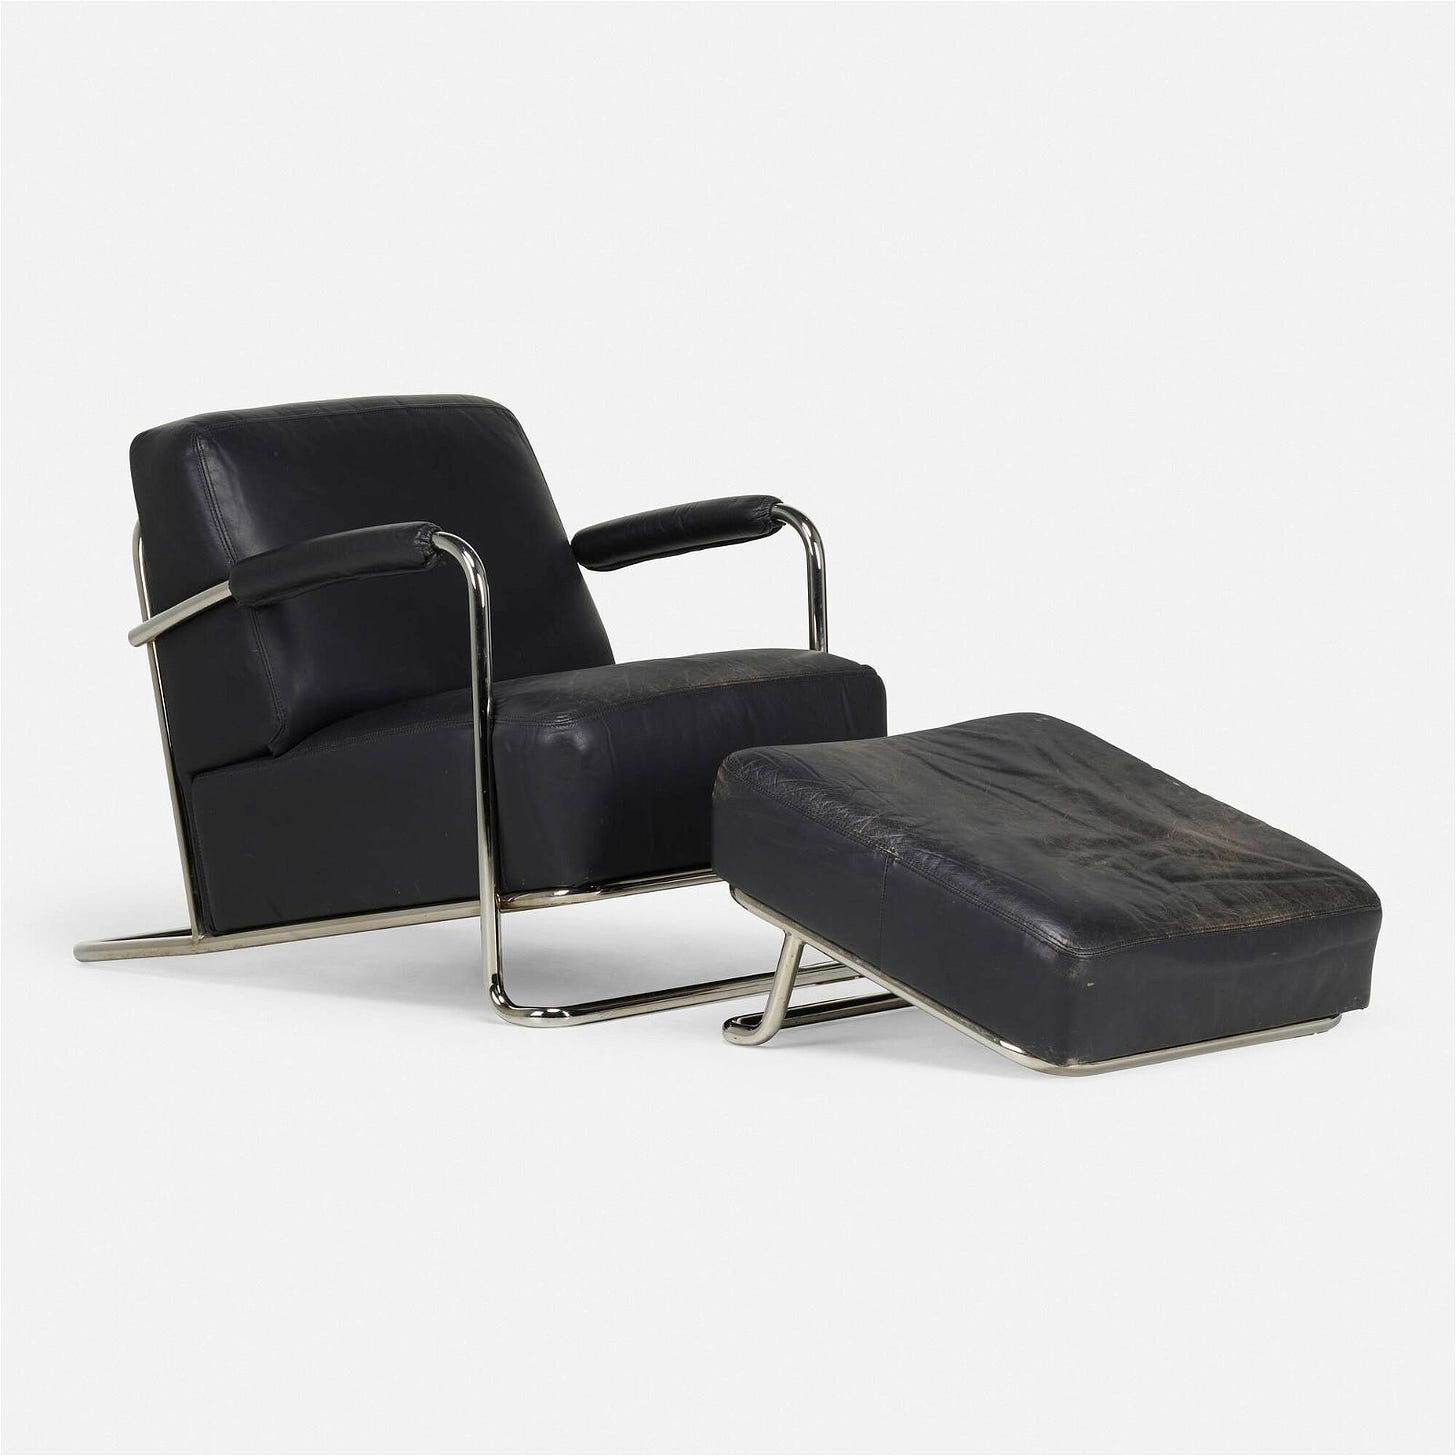 R.C. Coquery, Lounge chair and ottoman